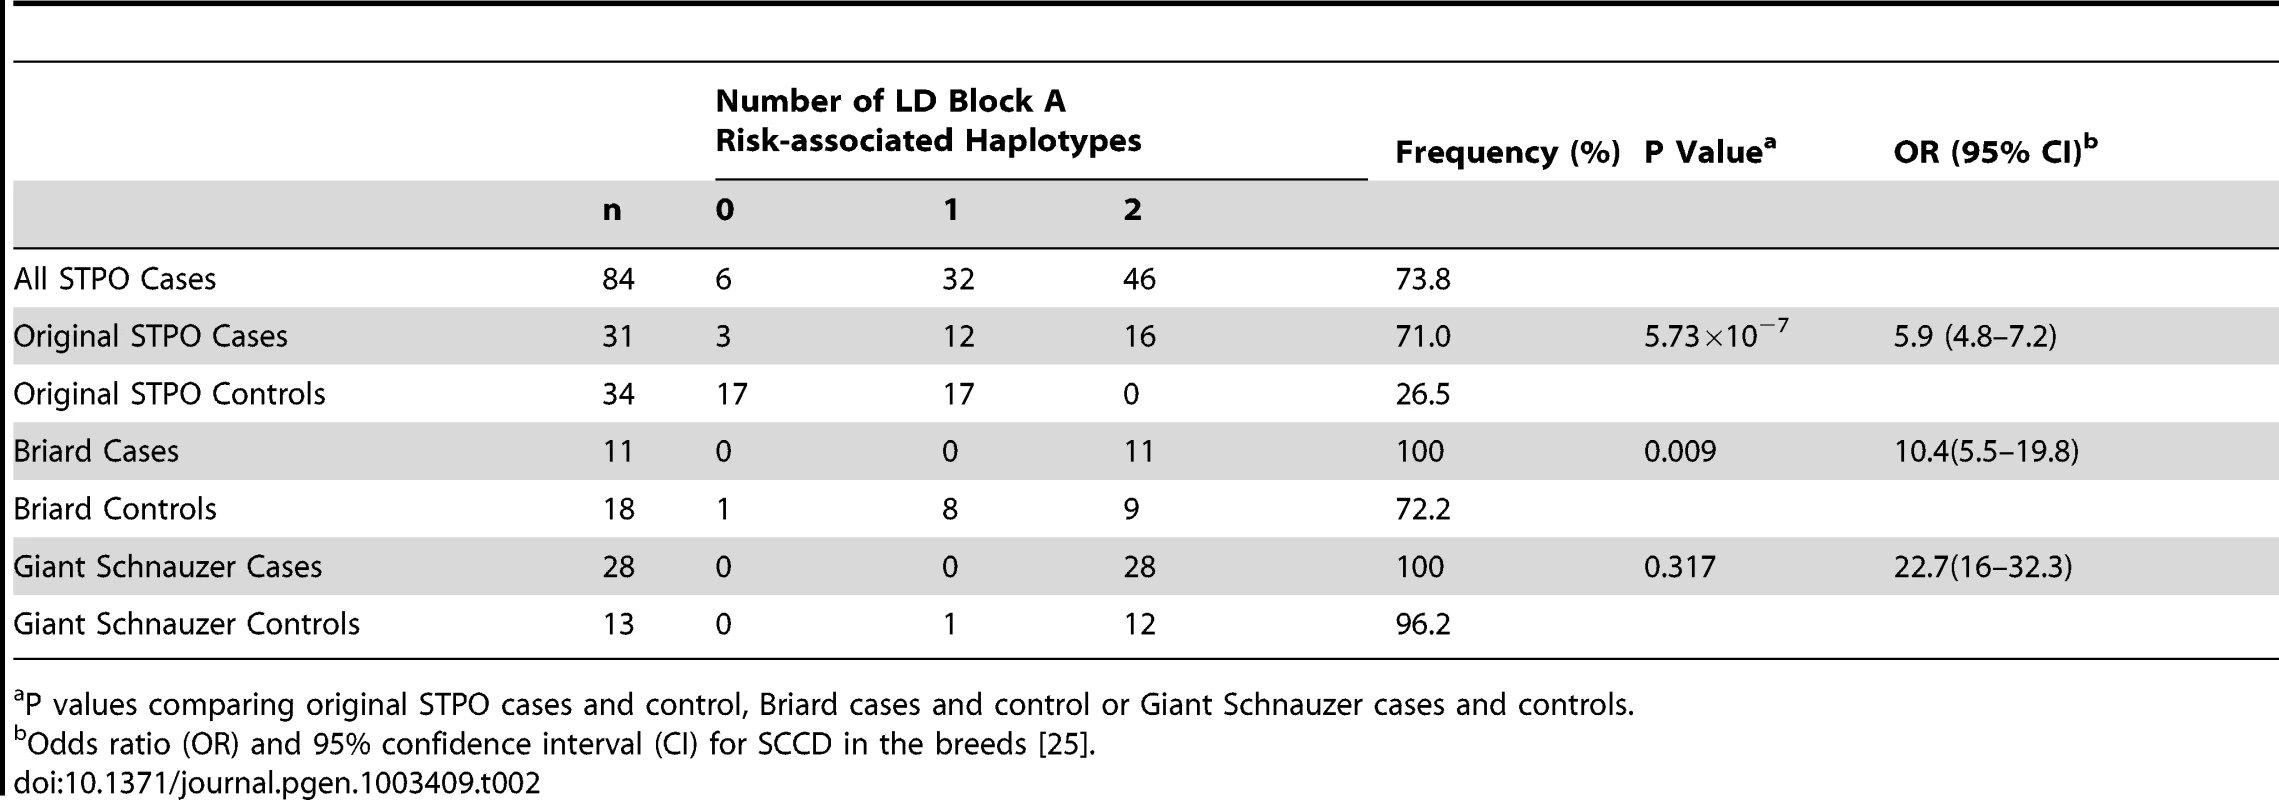 Association between SCCD risk and the LD block A risk-associated haplotype in the STPO, Briard, and Giant Schnauzer cases and controls.